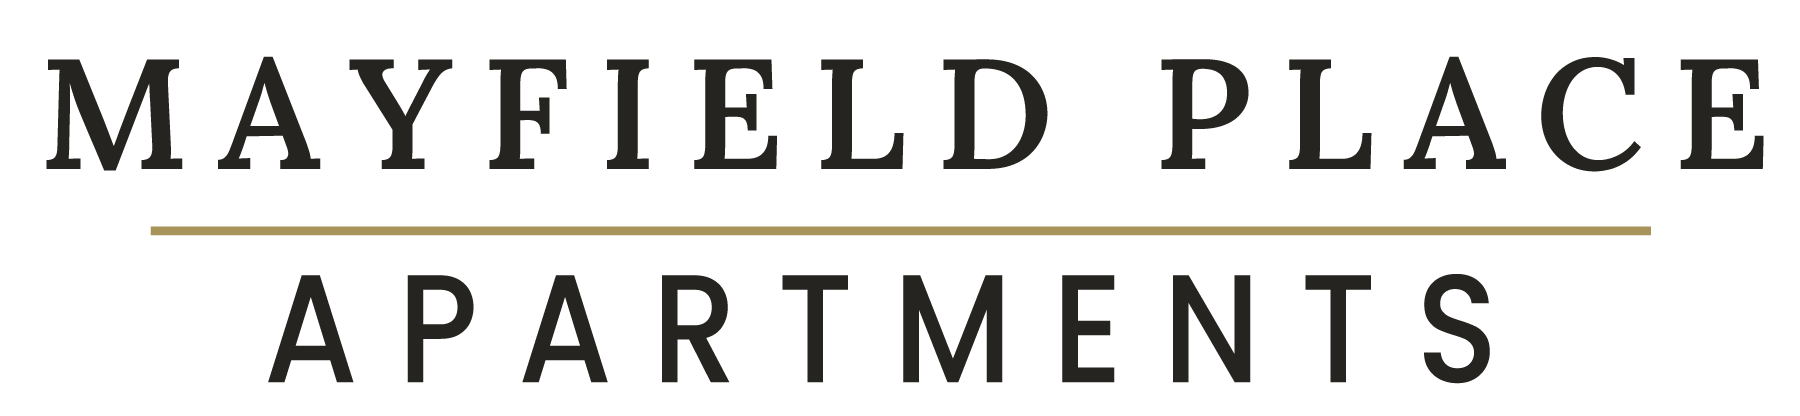 Mayfield Place Apartments Logo